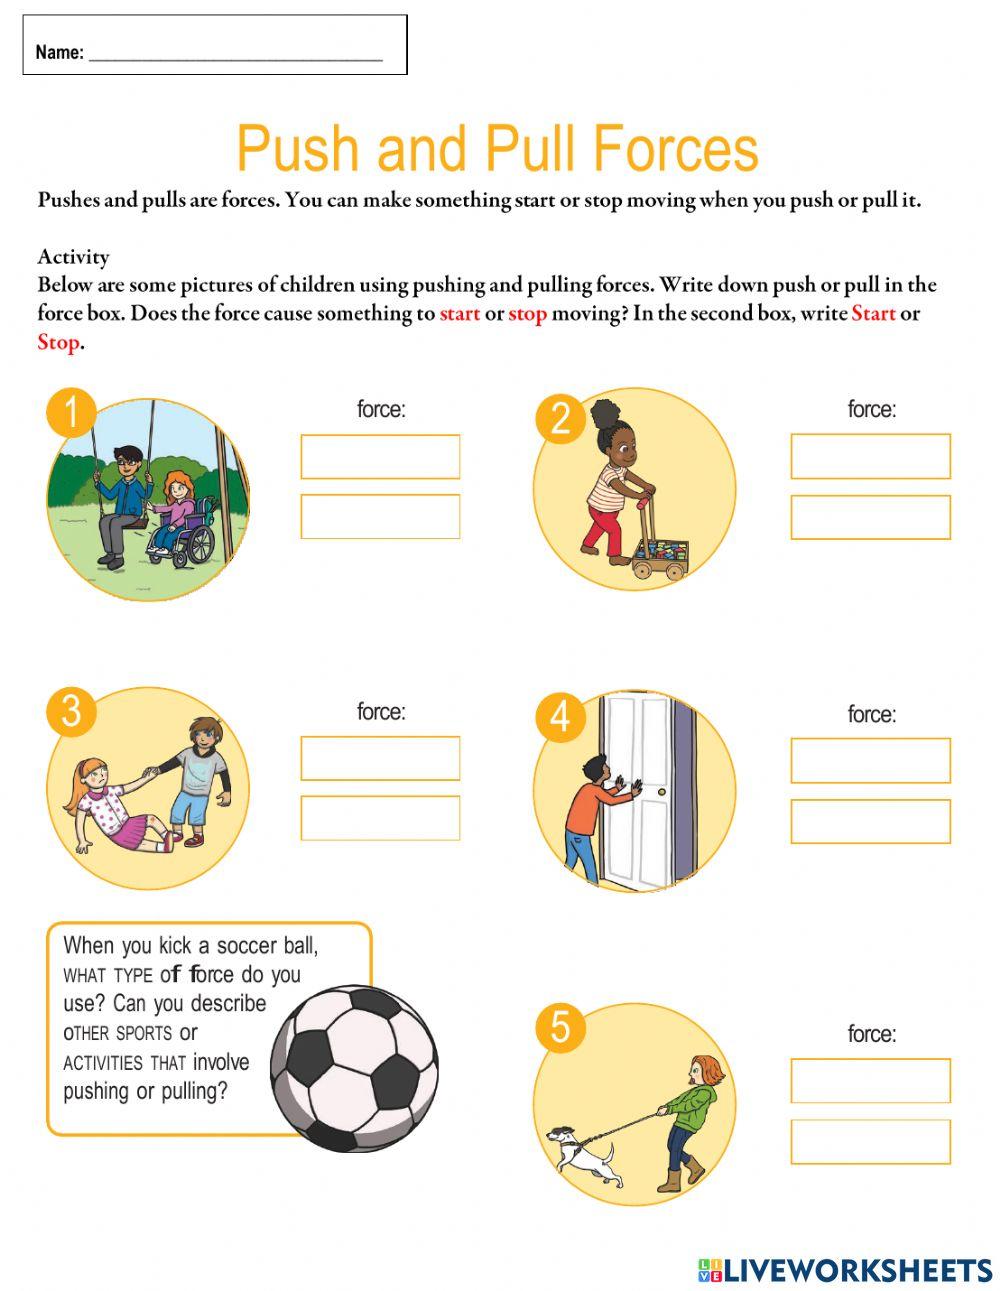 Push and Pull Activities